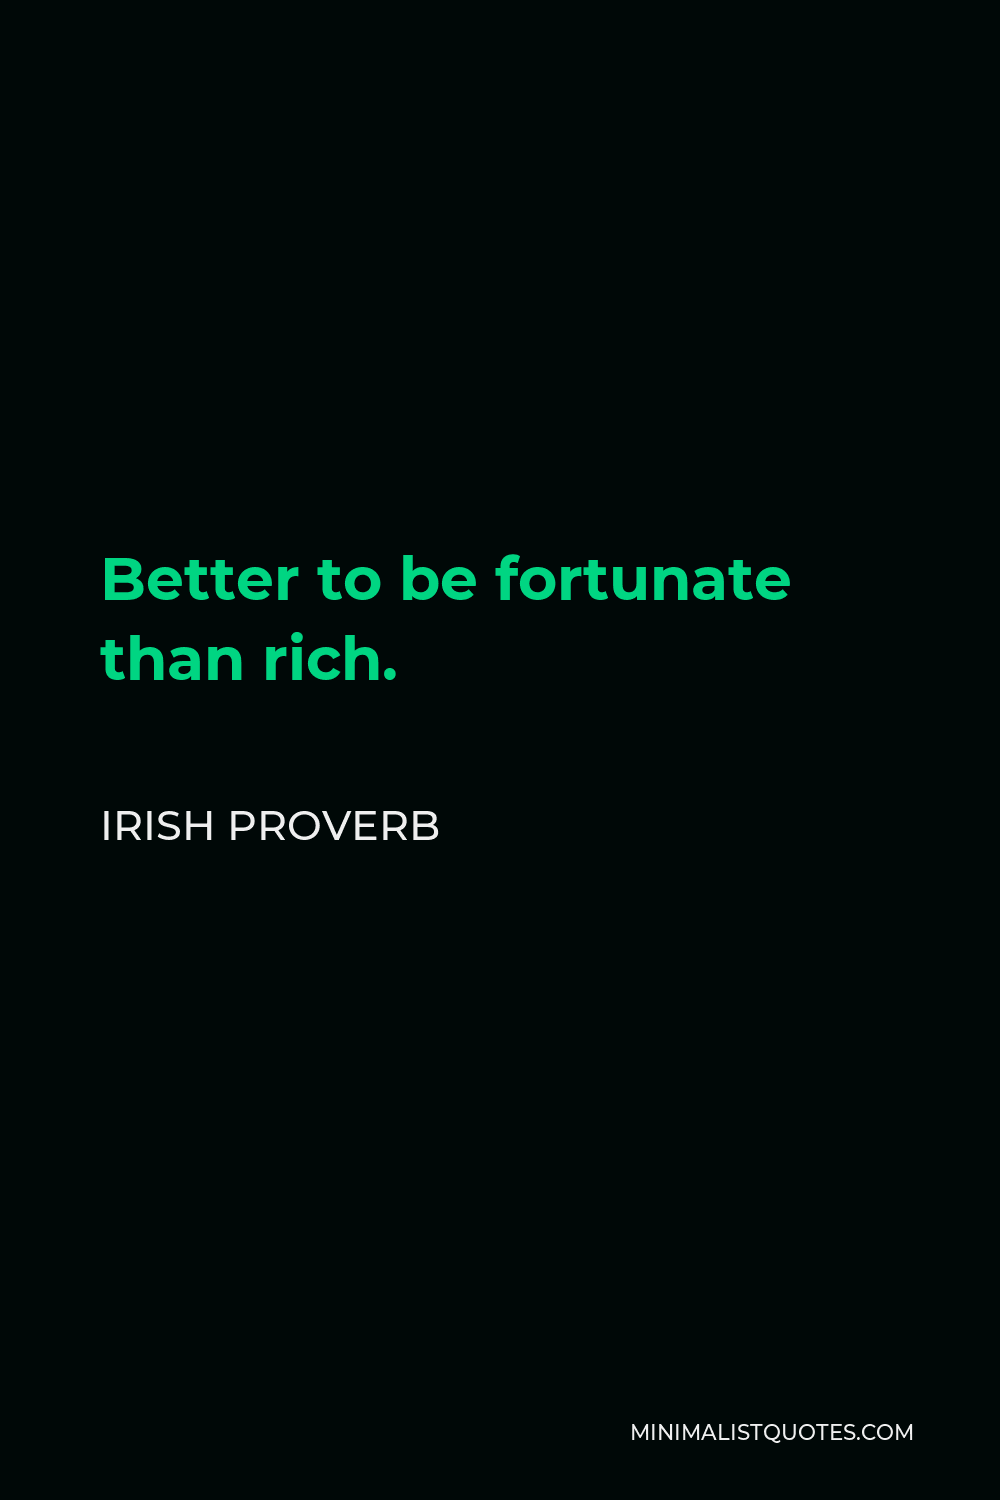 Irish Proverb Quote - Better to be fortunate than rich.